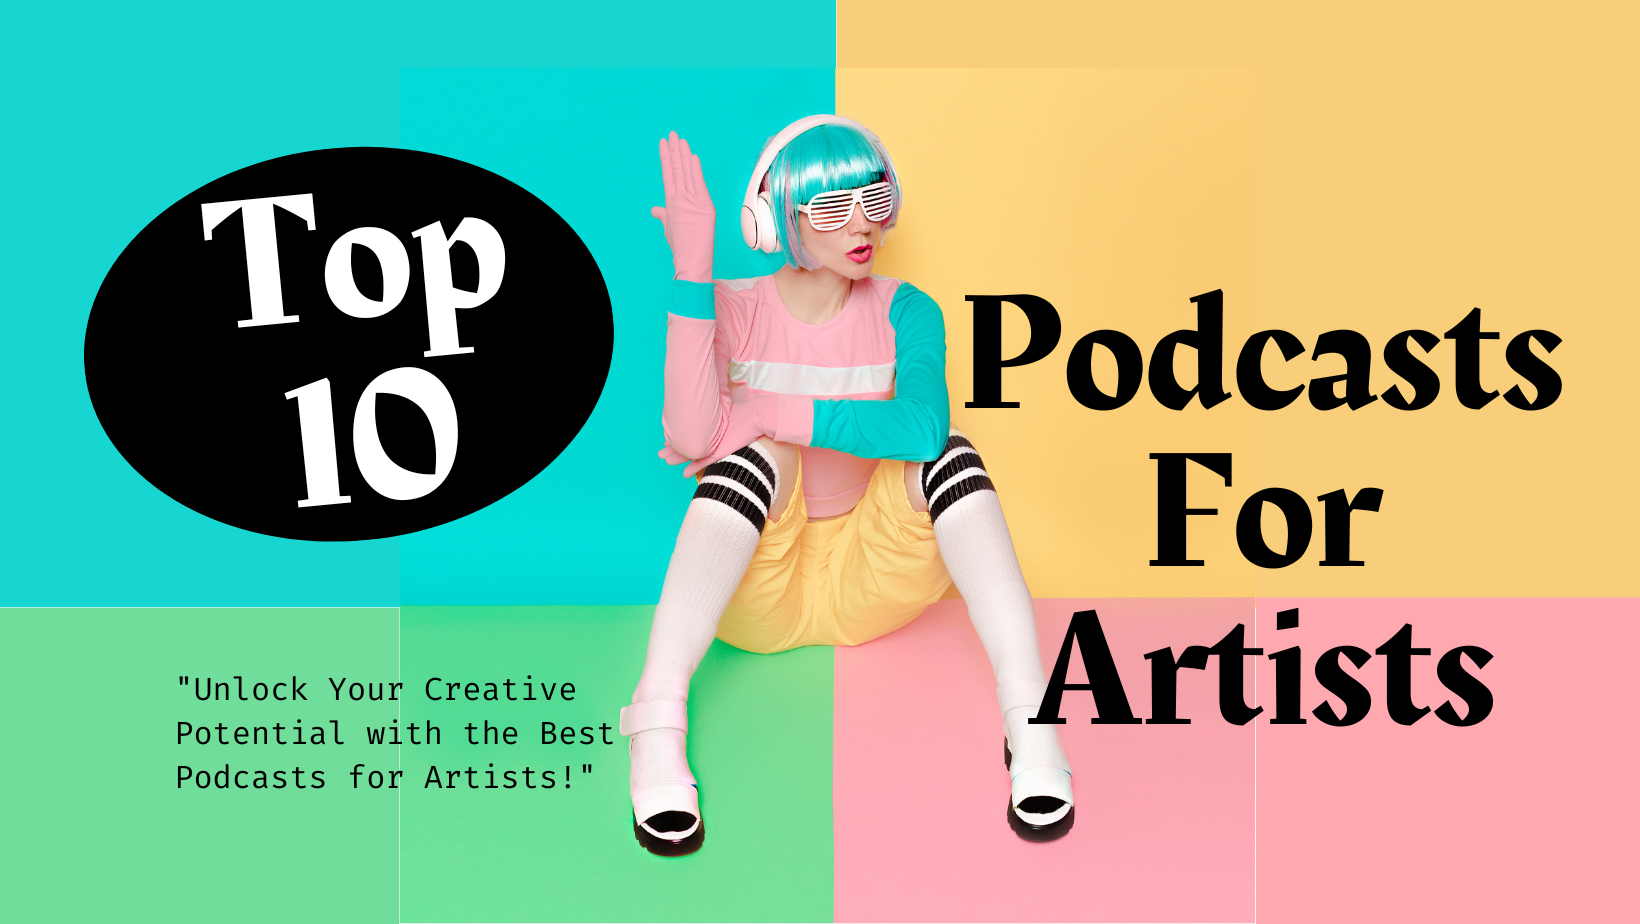 Podcasts for Artists – Top 10